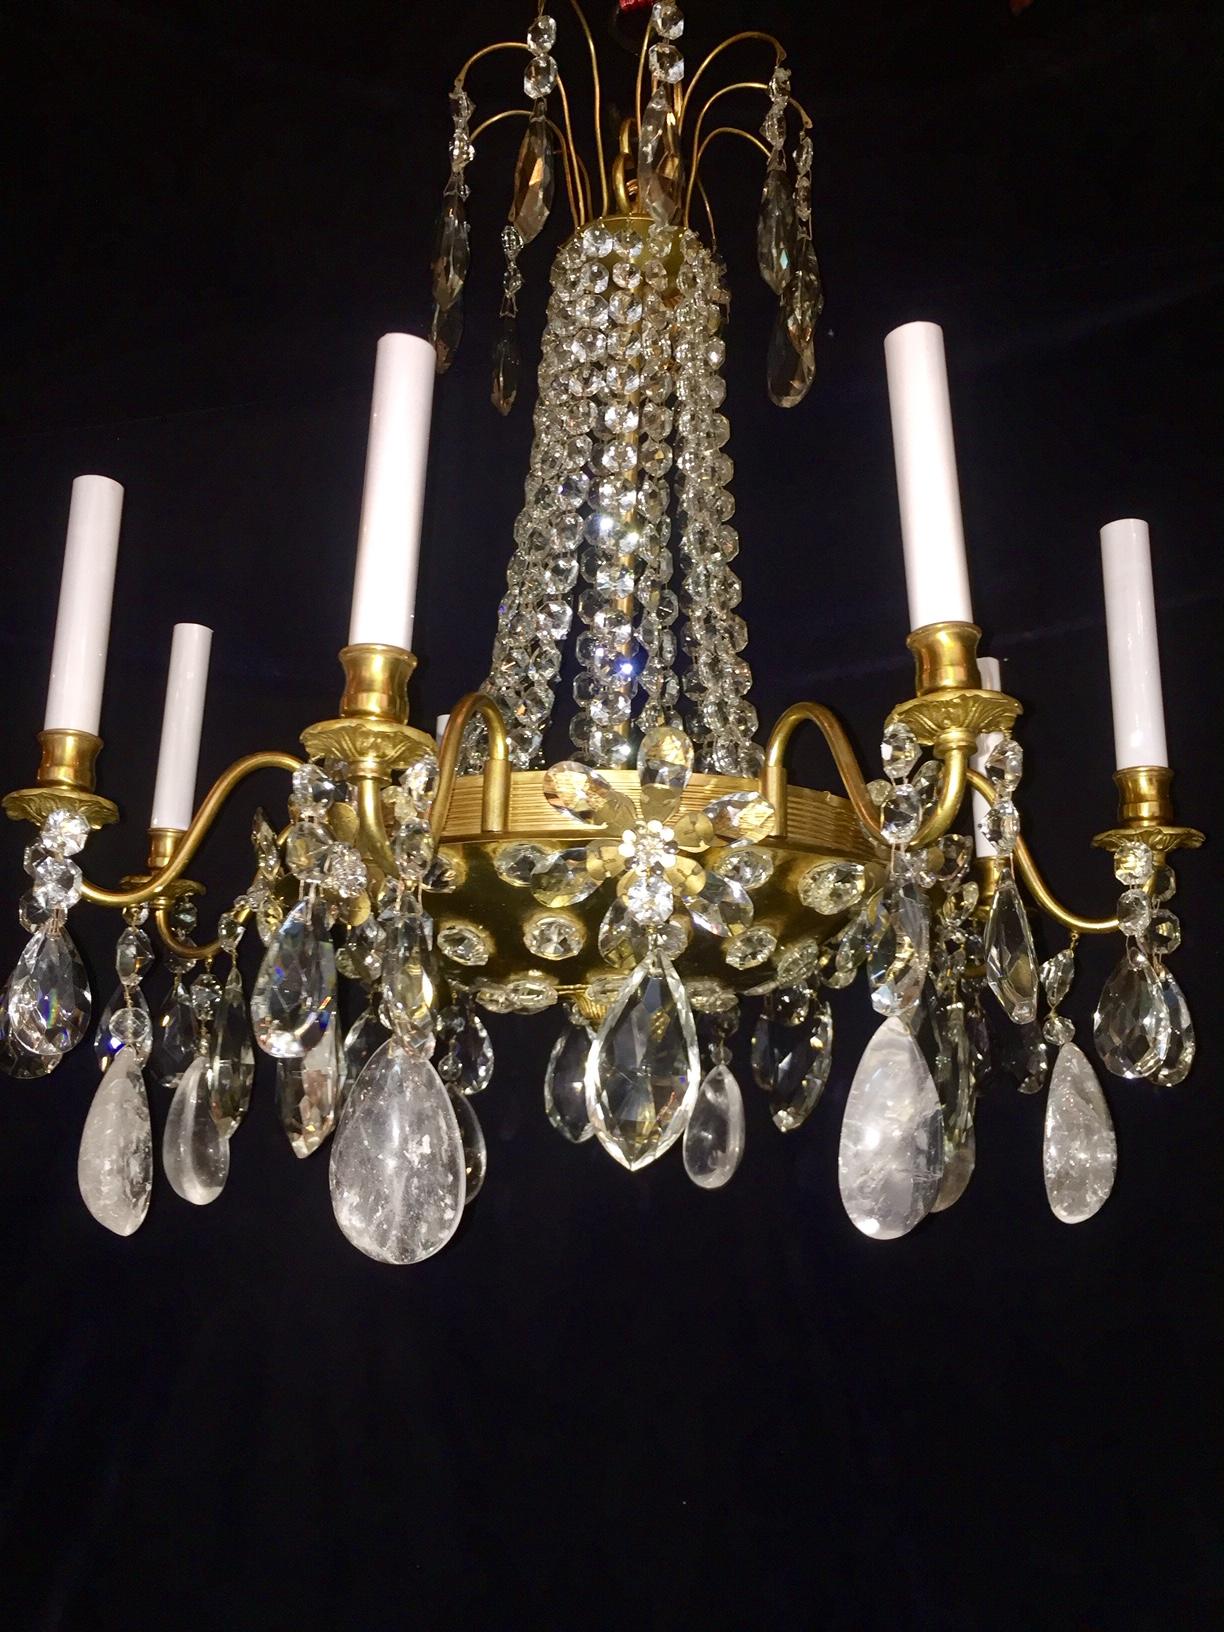 Hand-Carved Pair of French Rock Crystal and Gilt Bronze Chandeliers